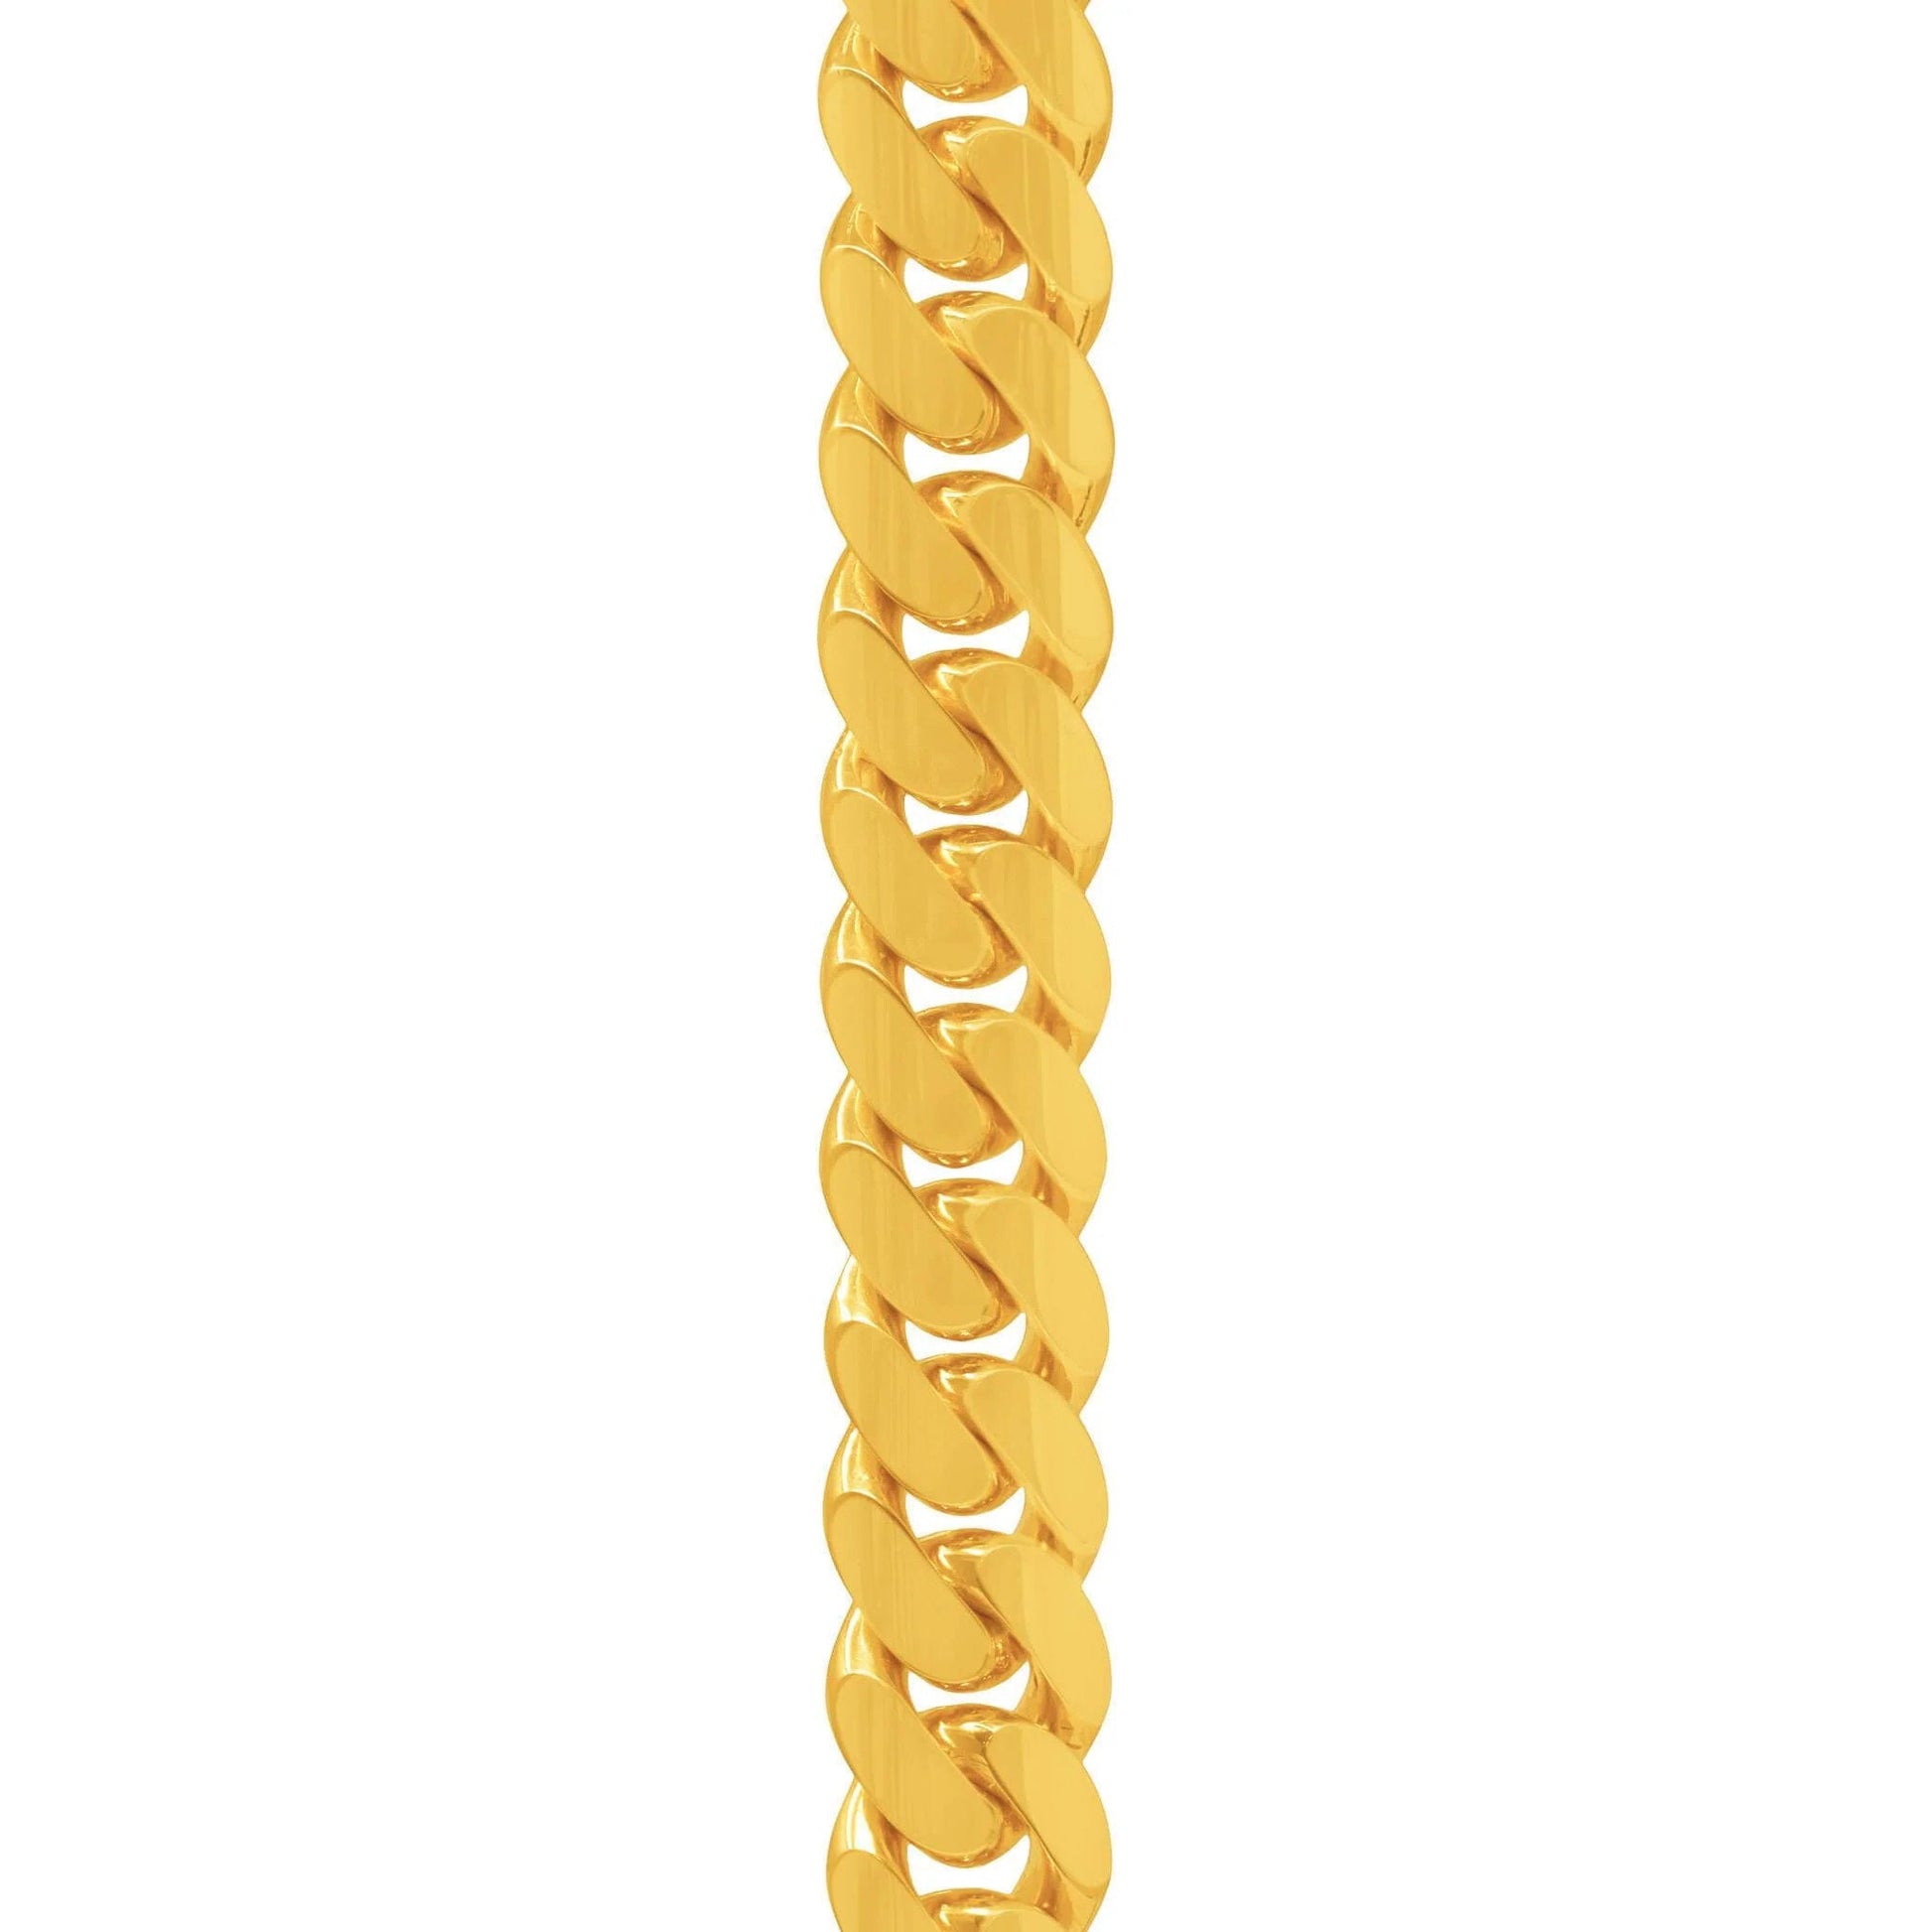 14mm Miami Cuban Link Bracelet in 10K Solid Yellow Gold - Vera Jewelry in Miami